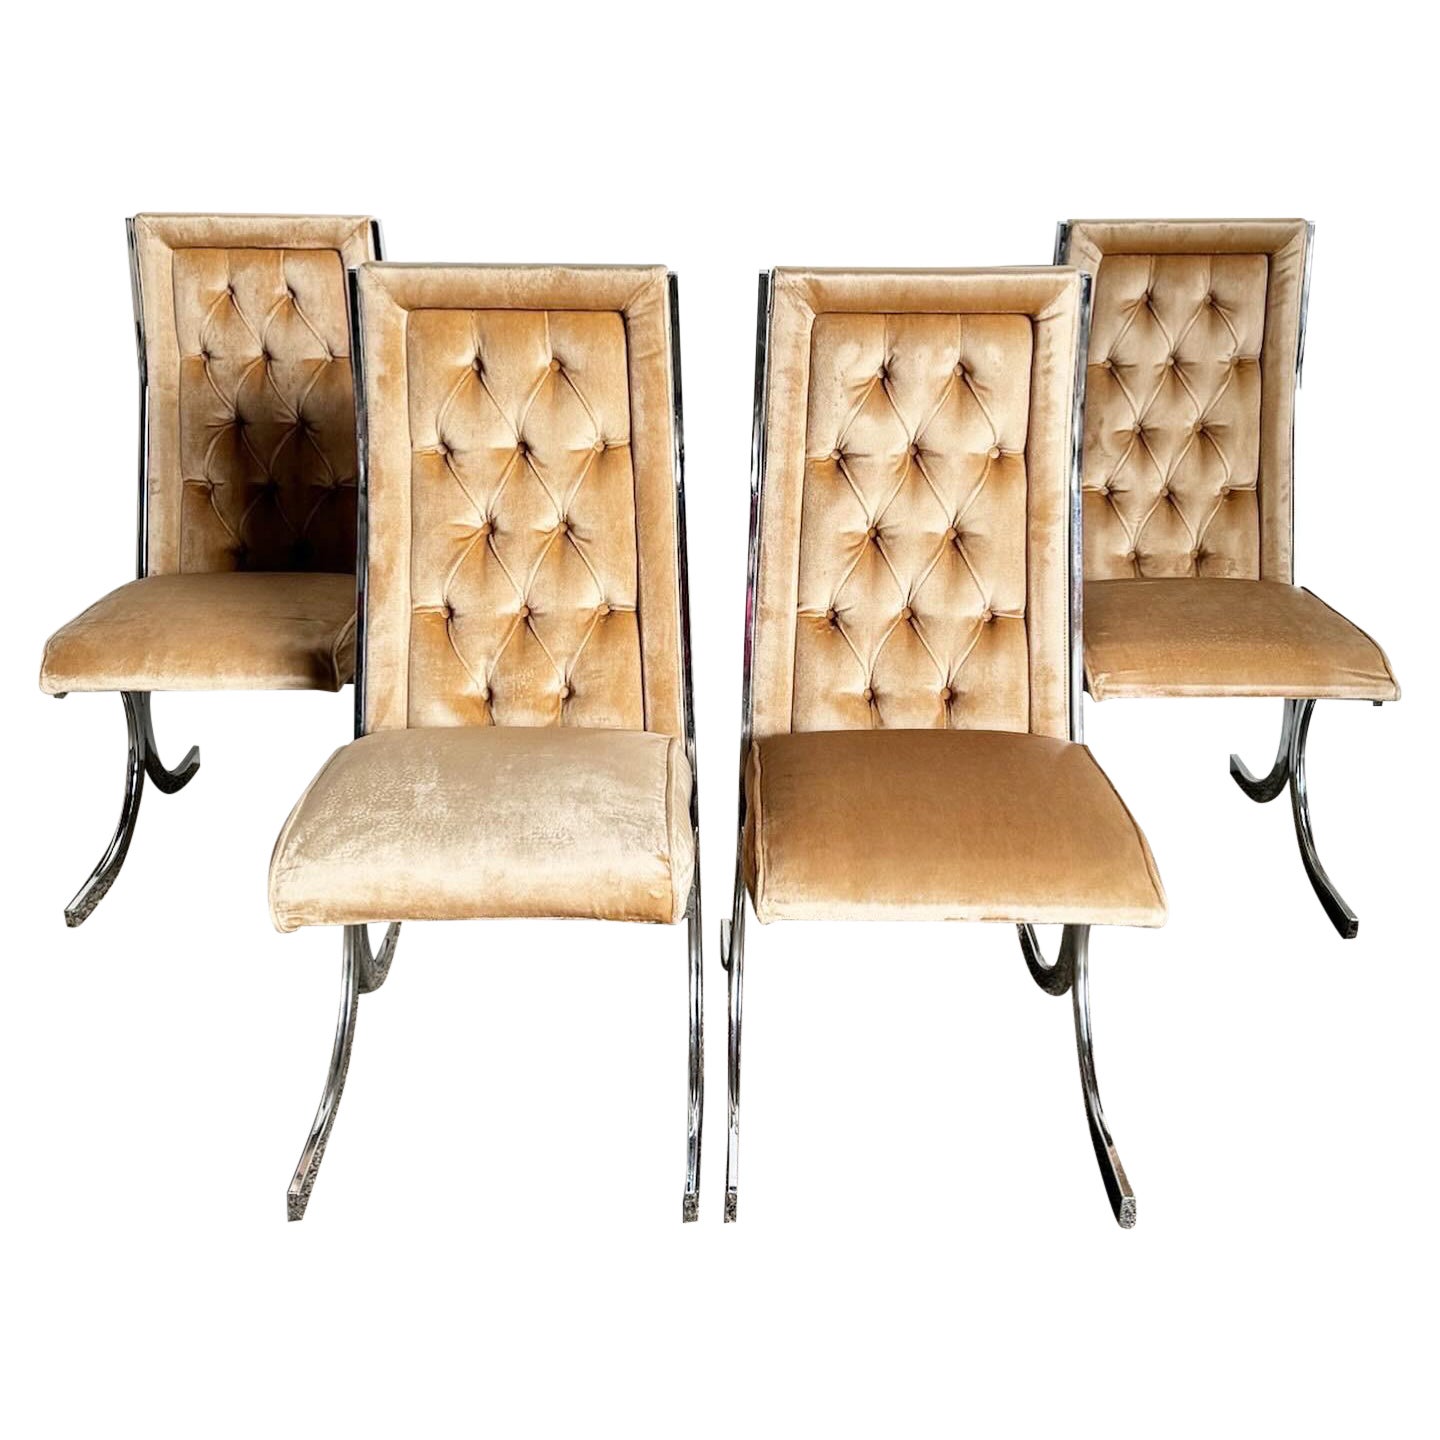 Mid Century Modern Tufted Fabric Chrome Dining Chairs - Set of 6 For Sale